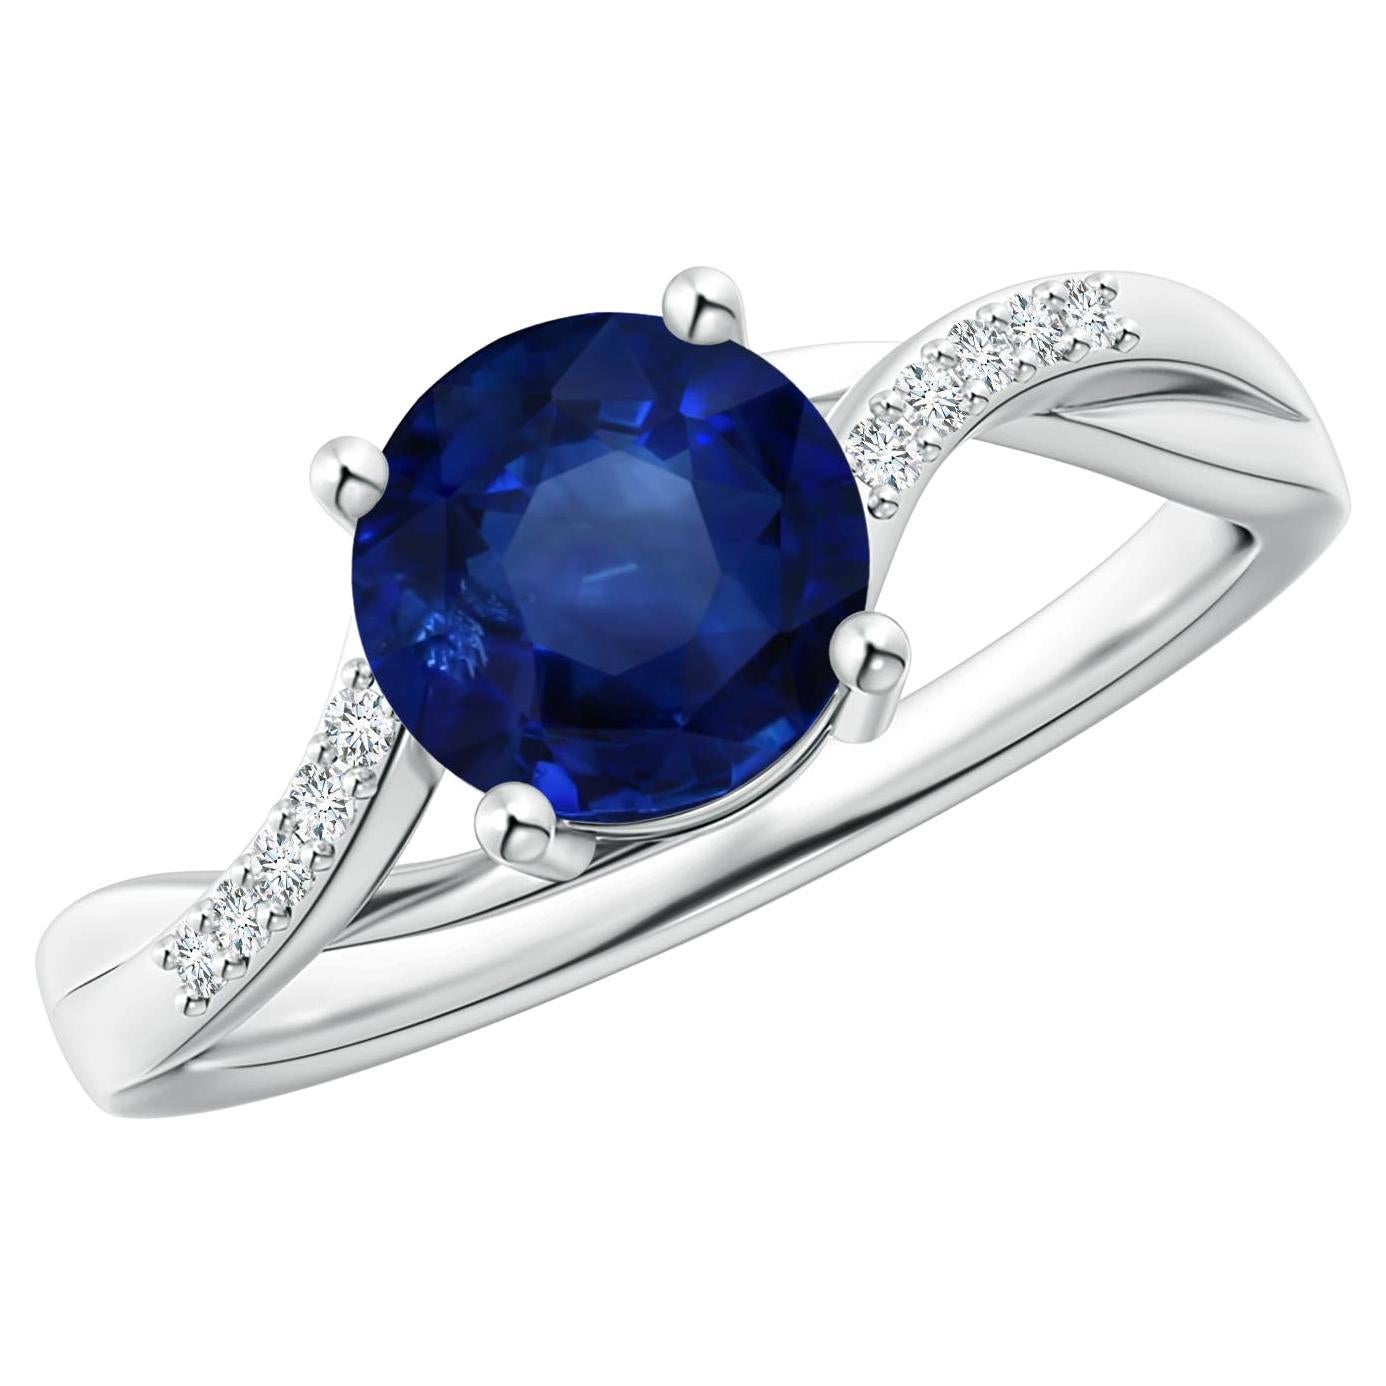 For Sale:  Angara Gia Certified Natural Blue Sapphire Split Shank Ring in White Gold